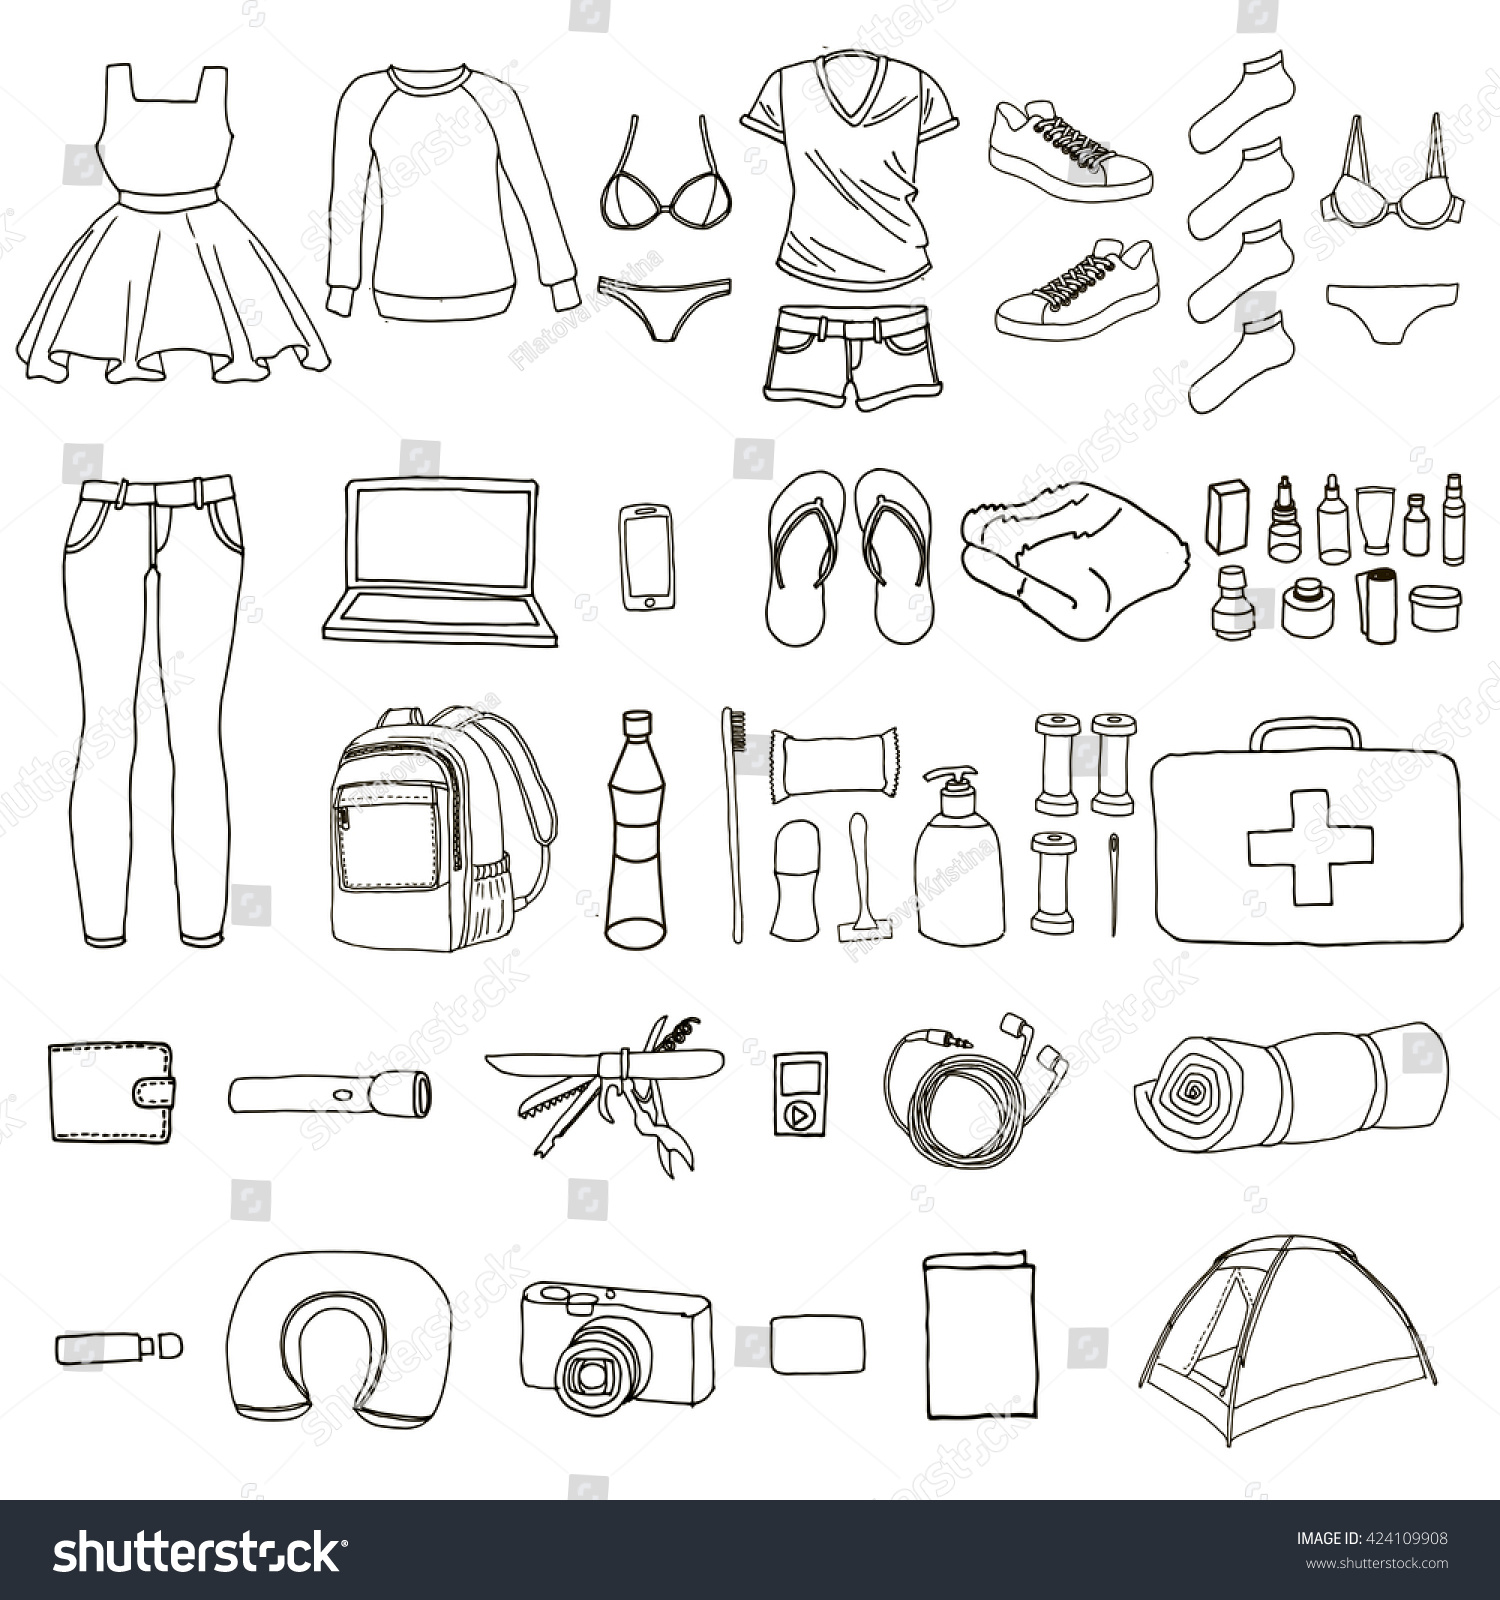 12,716 Article of clothing Images, Stock Photos & Vectors | Shutterstock